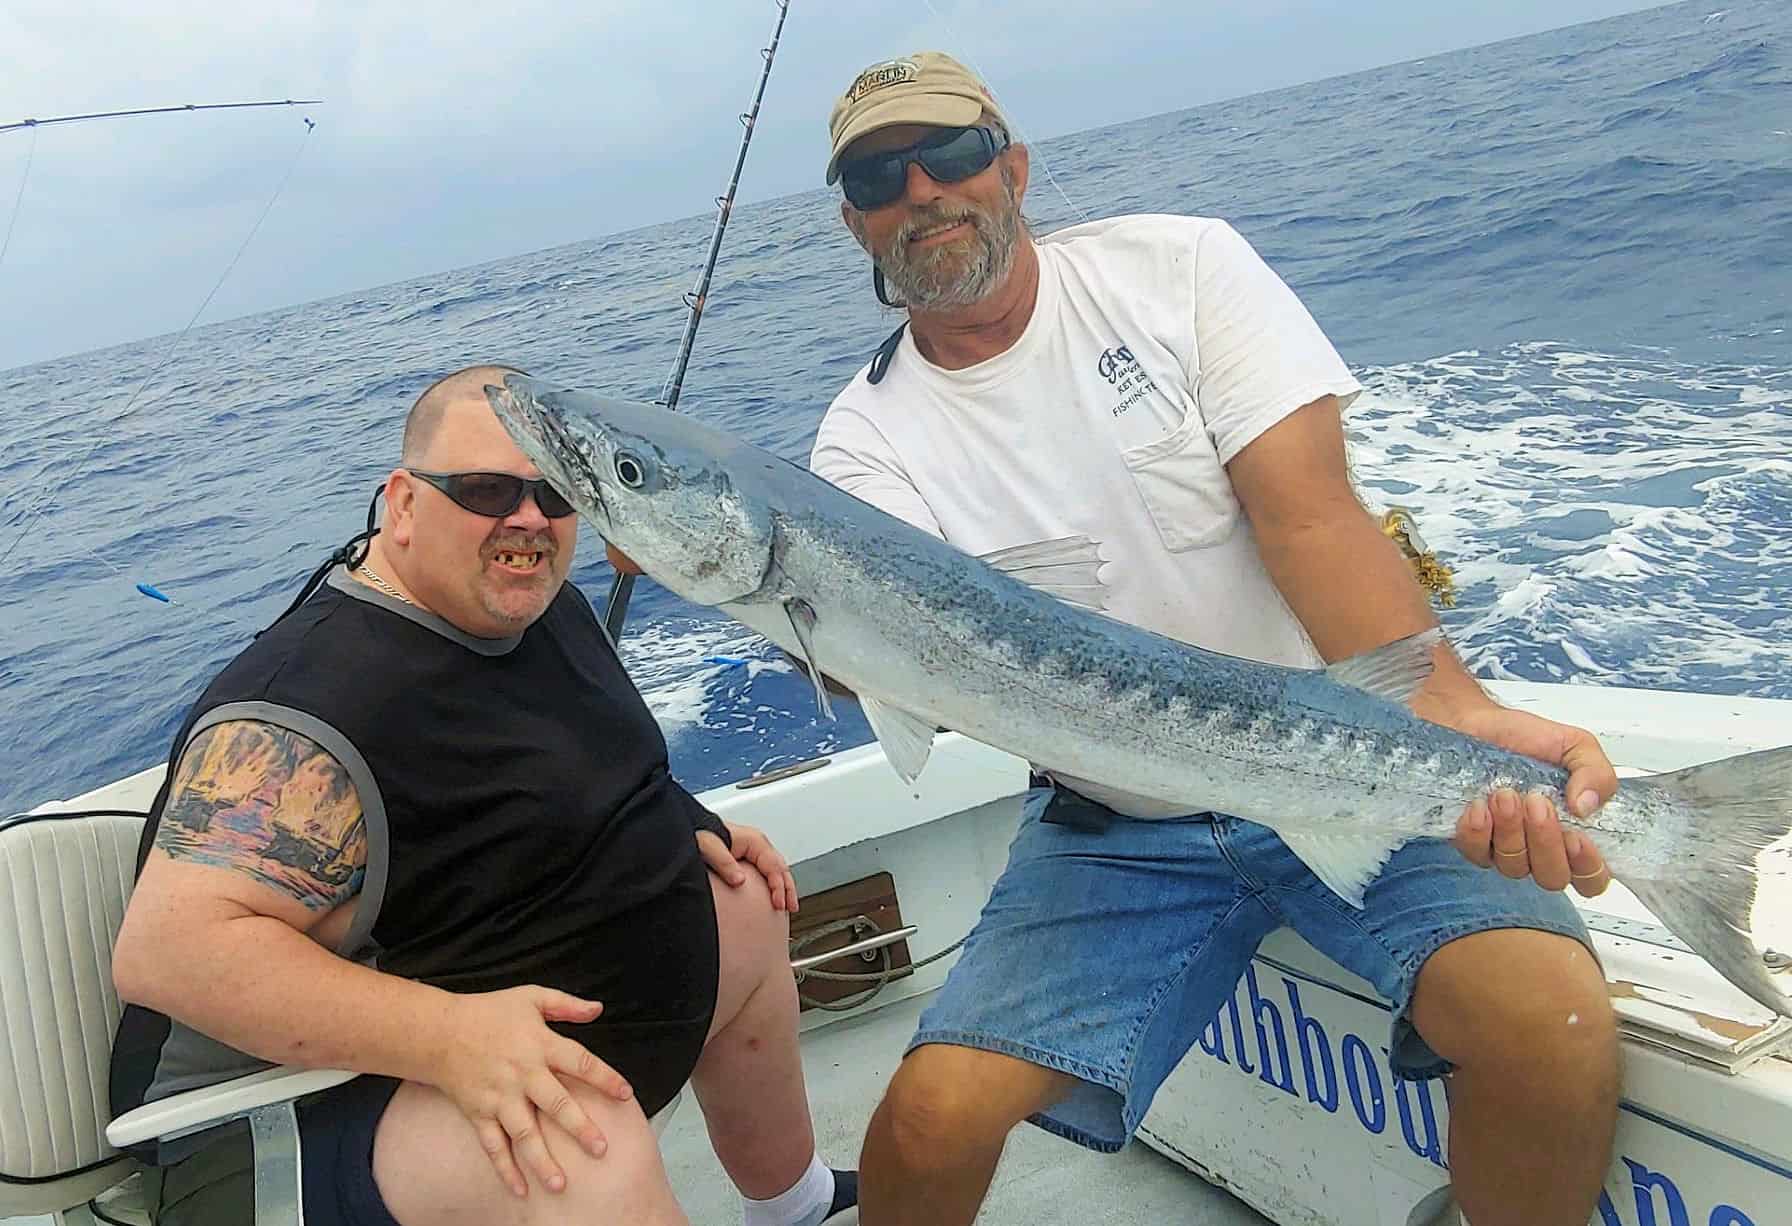 Barracuda caught and released offshore fishing on the charter Boat Southbound